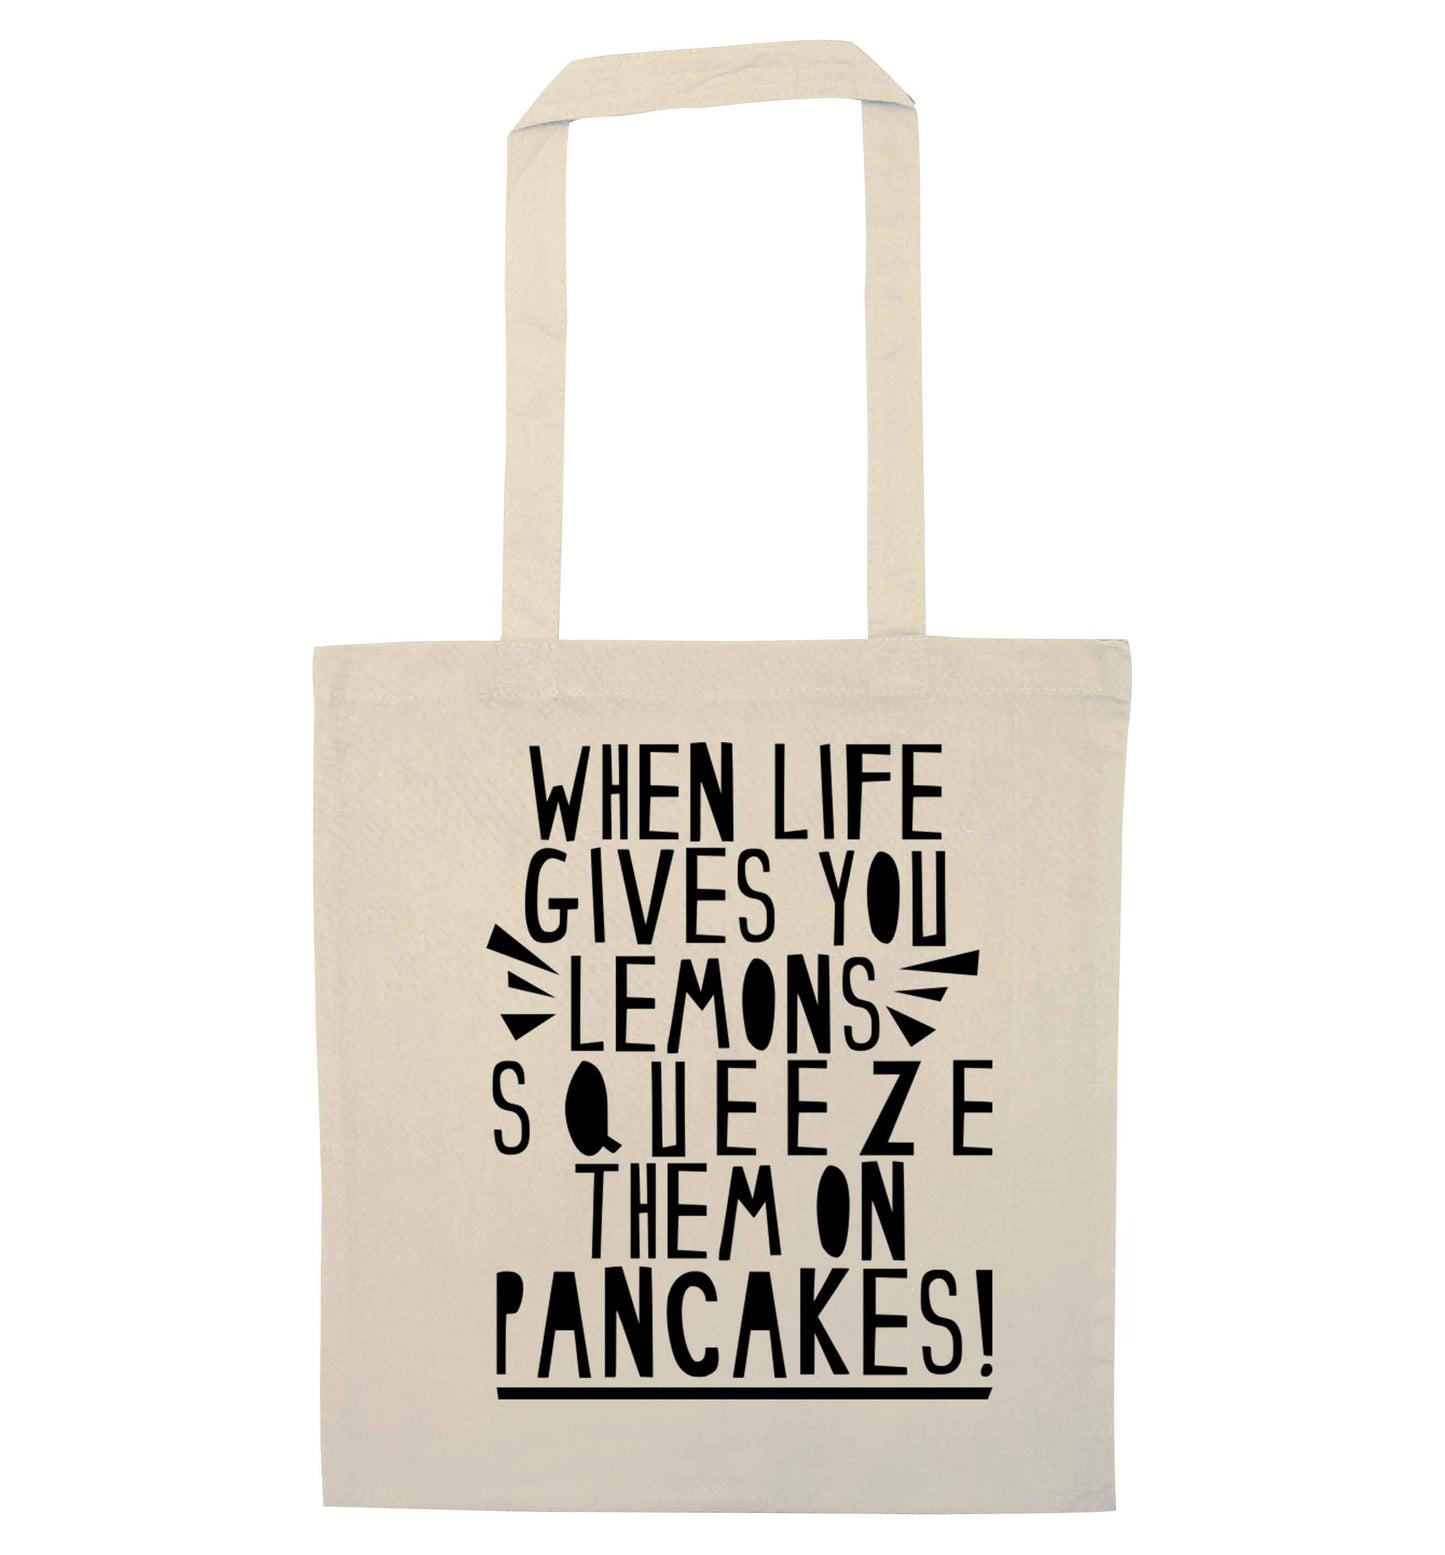 When life gives you lemons squeeze them on pancakes! natural tote bag